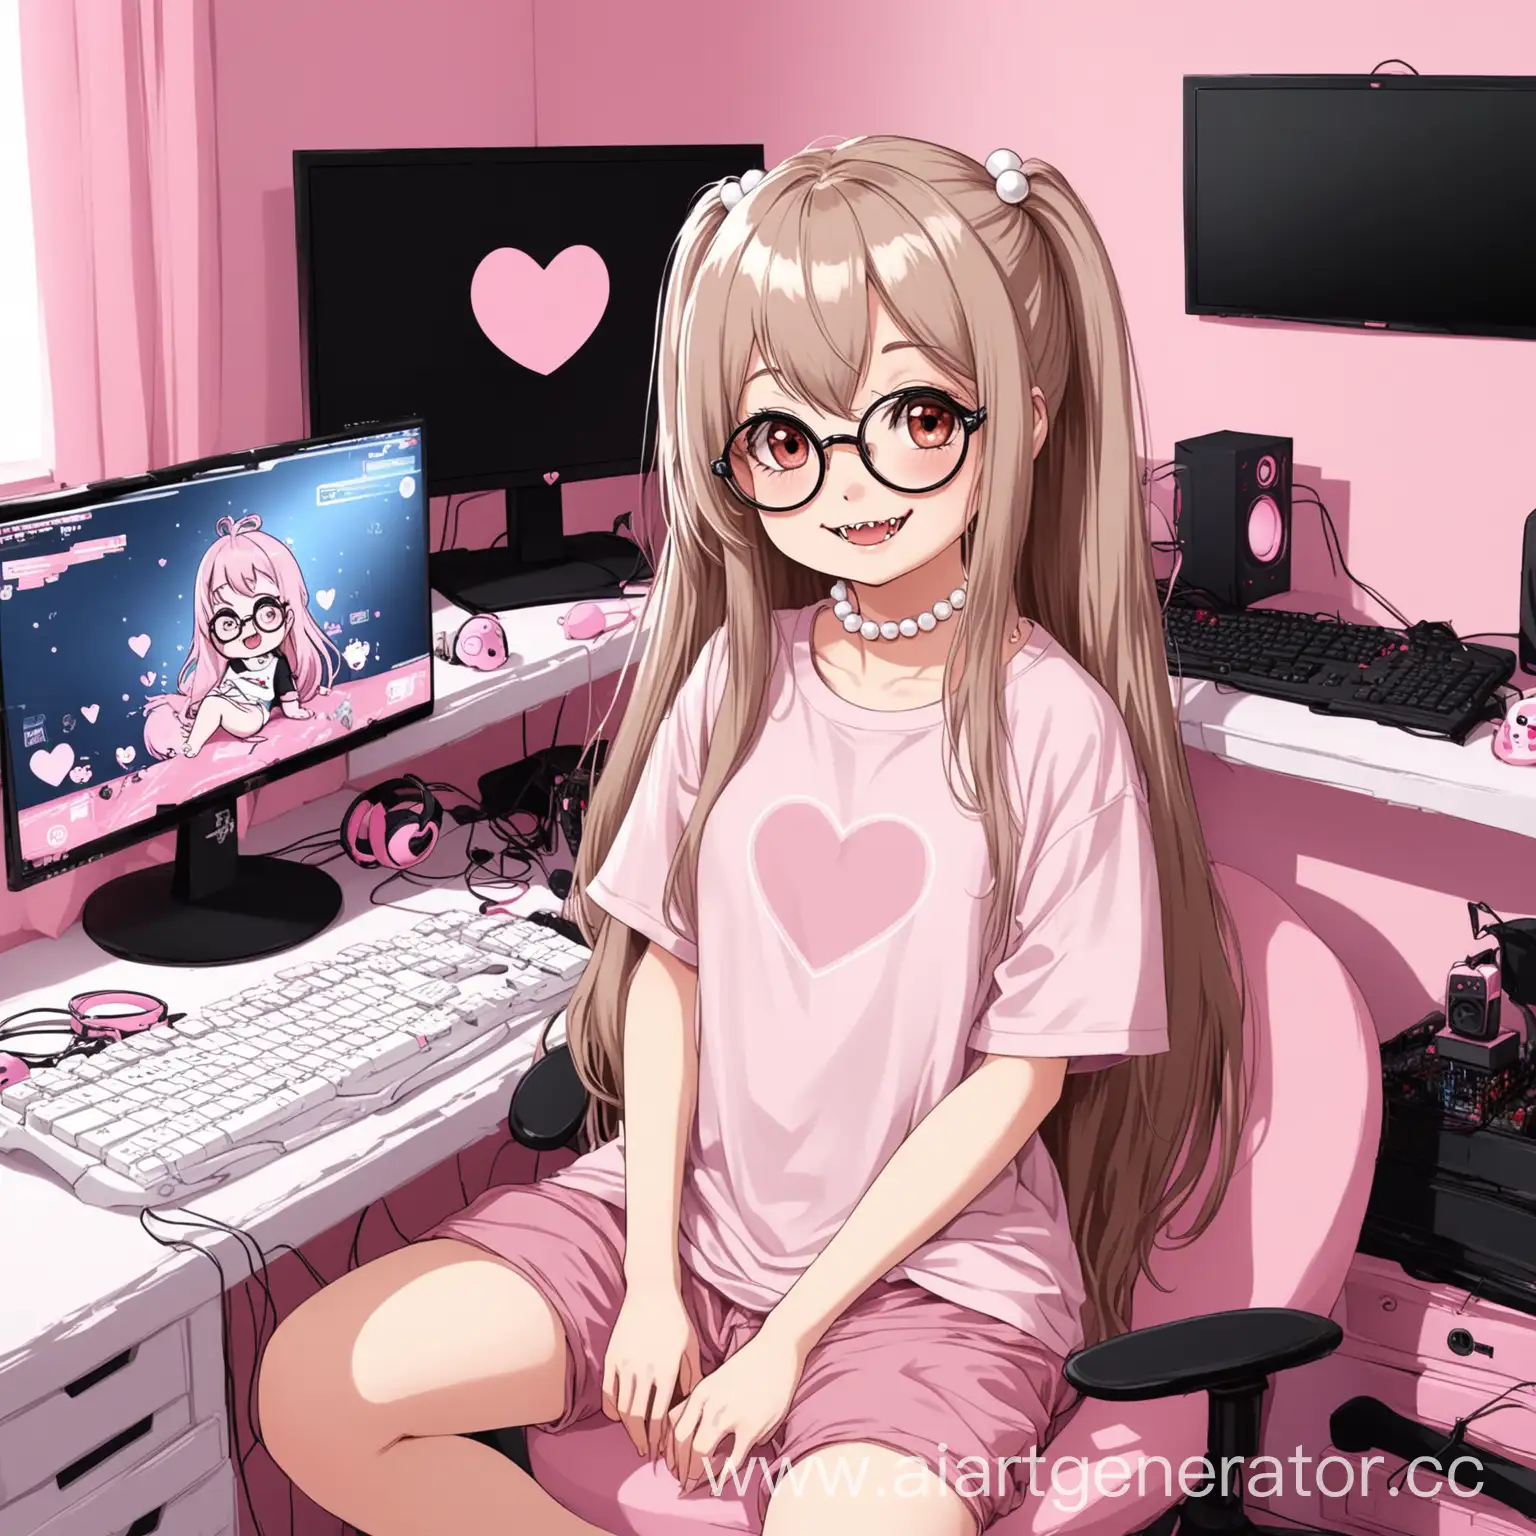 rown eyes light brown long hairs. Glasses with light pink boards. Baby pink oversize T-shirt. White bead WHITE COLOUR OF BEAD  choker with  iron small heart on the middle. A little bit thick thighs, small waist. A small chest, cute smile with little fangs. Cozy room in white/pink colours  on the backround with computer  gaming setup. In black loosy  pants. 